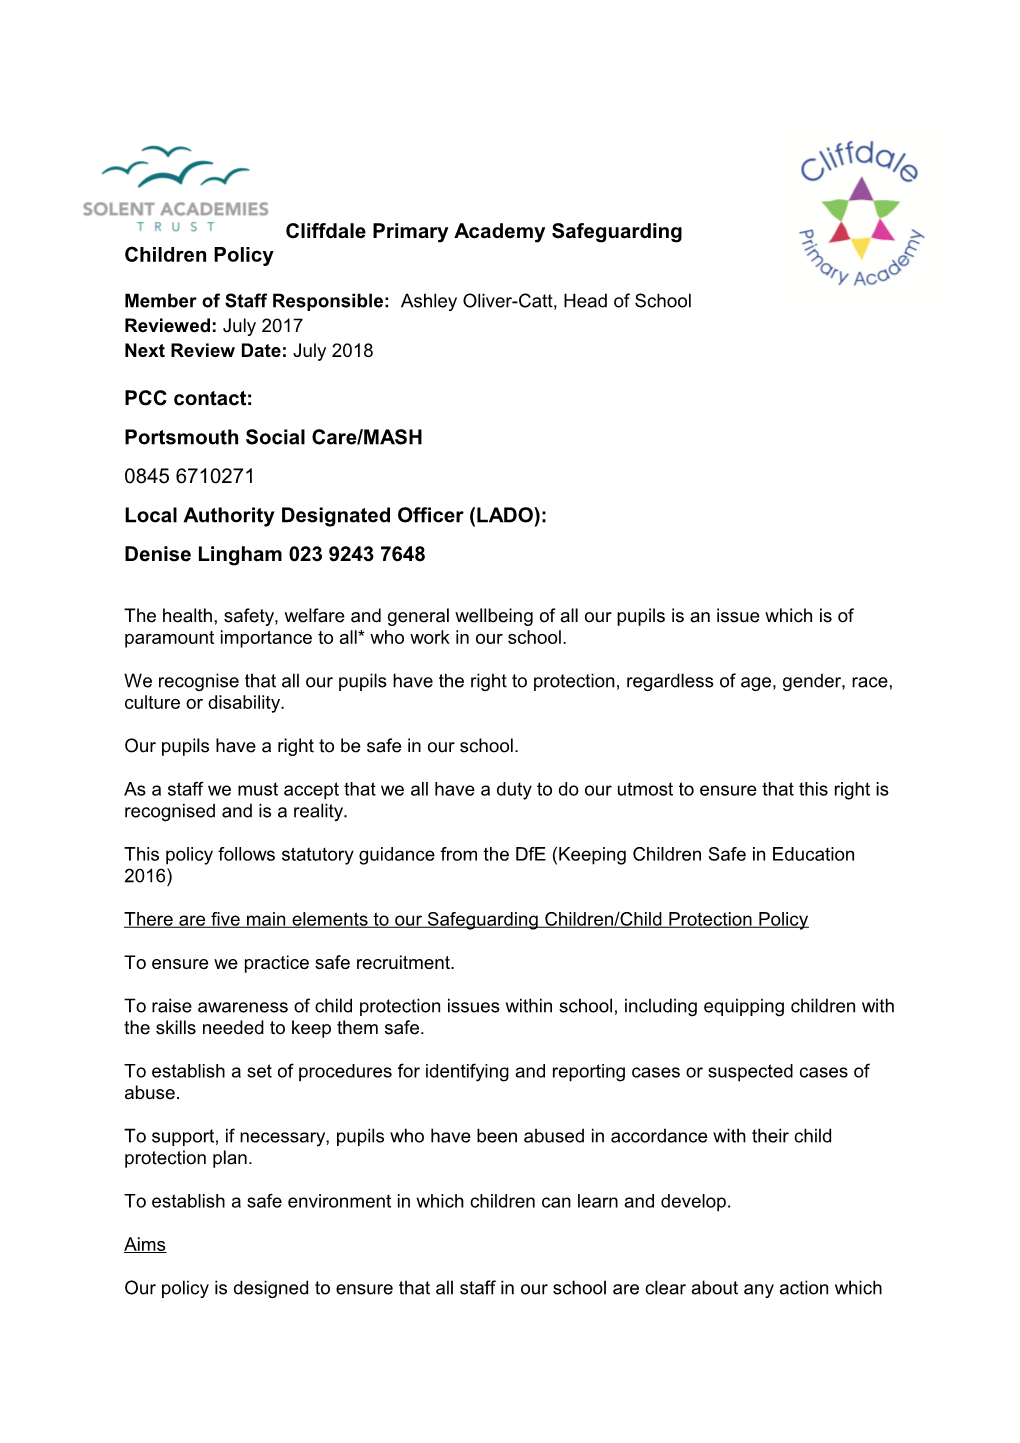 Cliffdale Primary Academy Safeguarding Children Policy